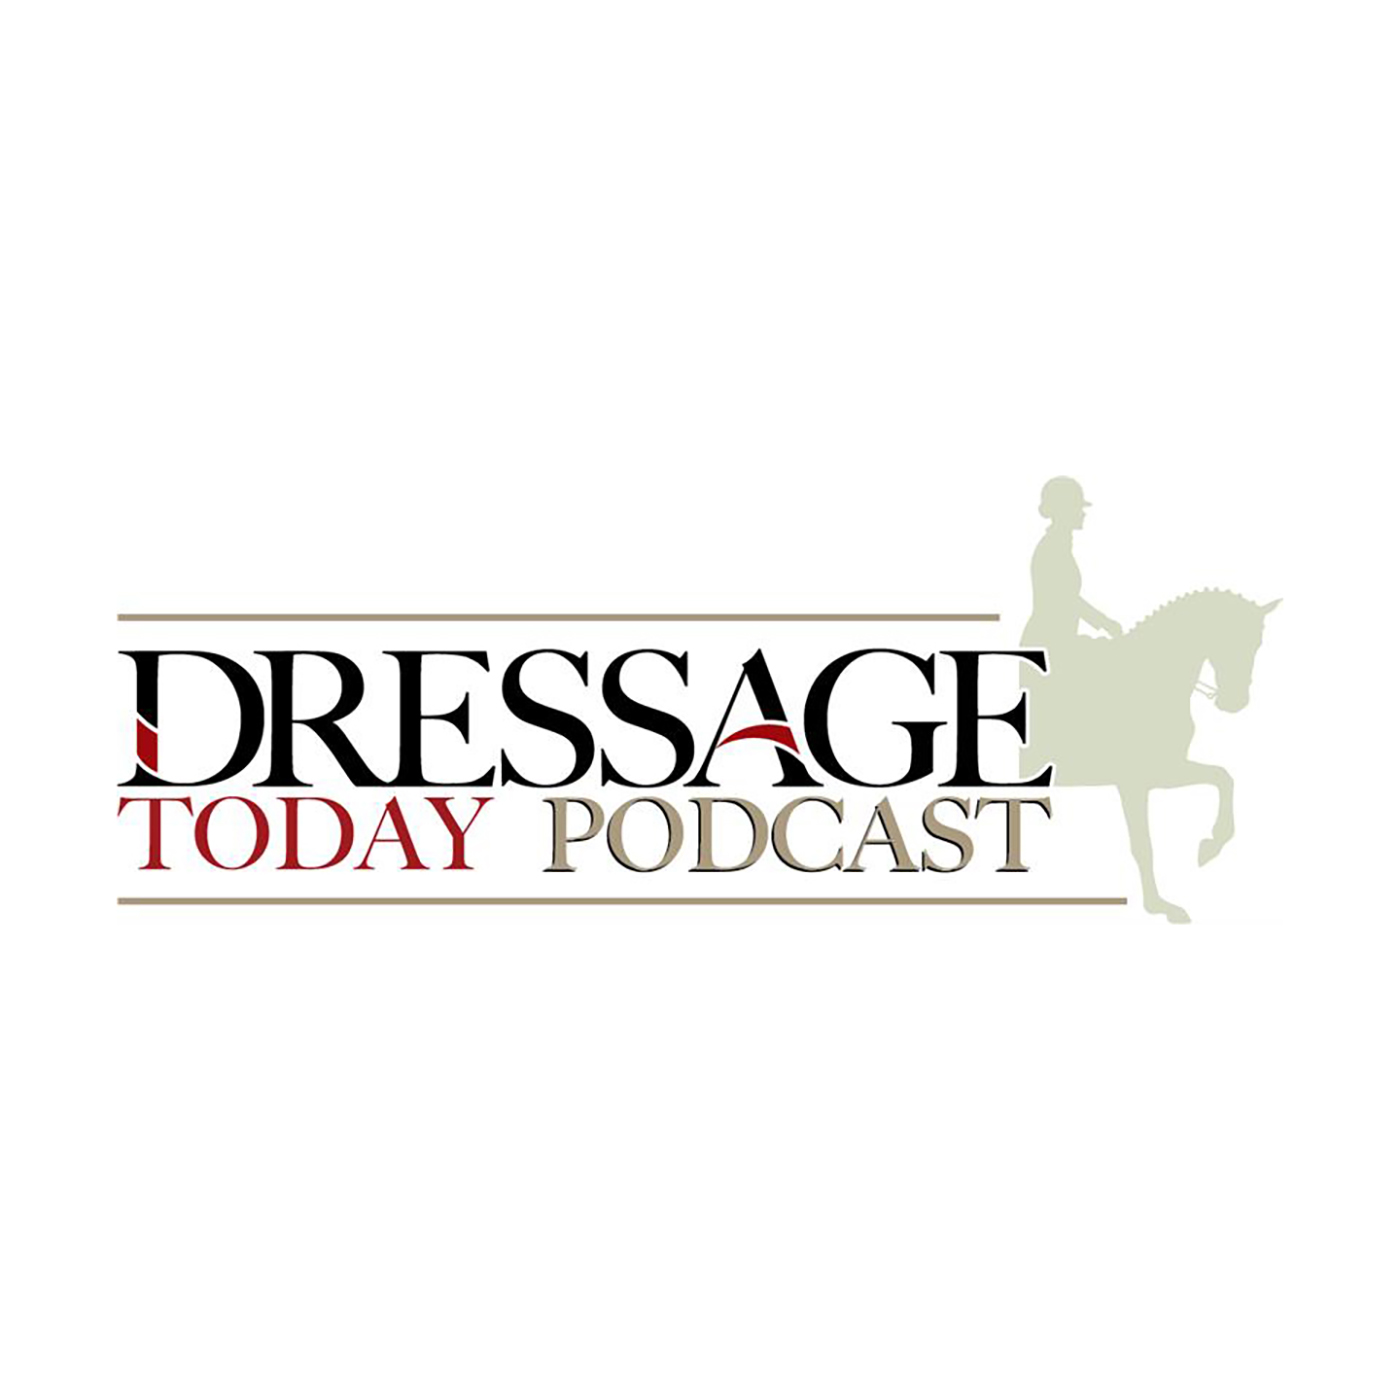 Dressage Today Podcast